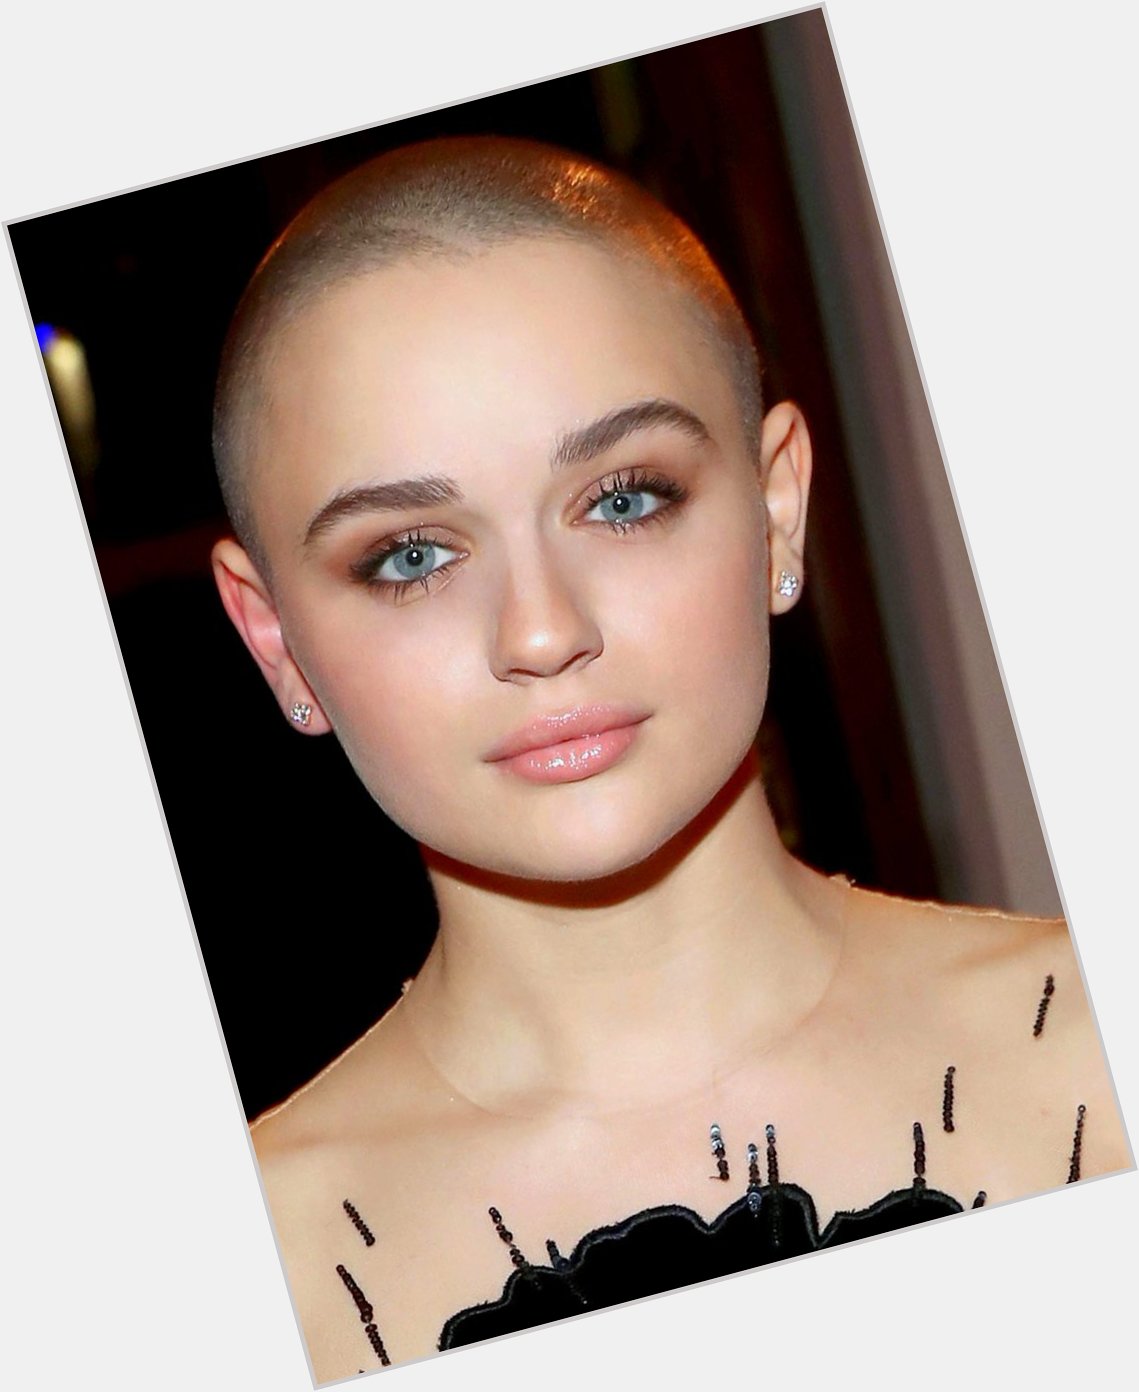 Joey King July 30 Sending Very Happy Birthday Wishes! All the Best!   